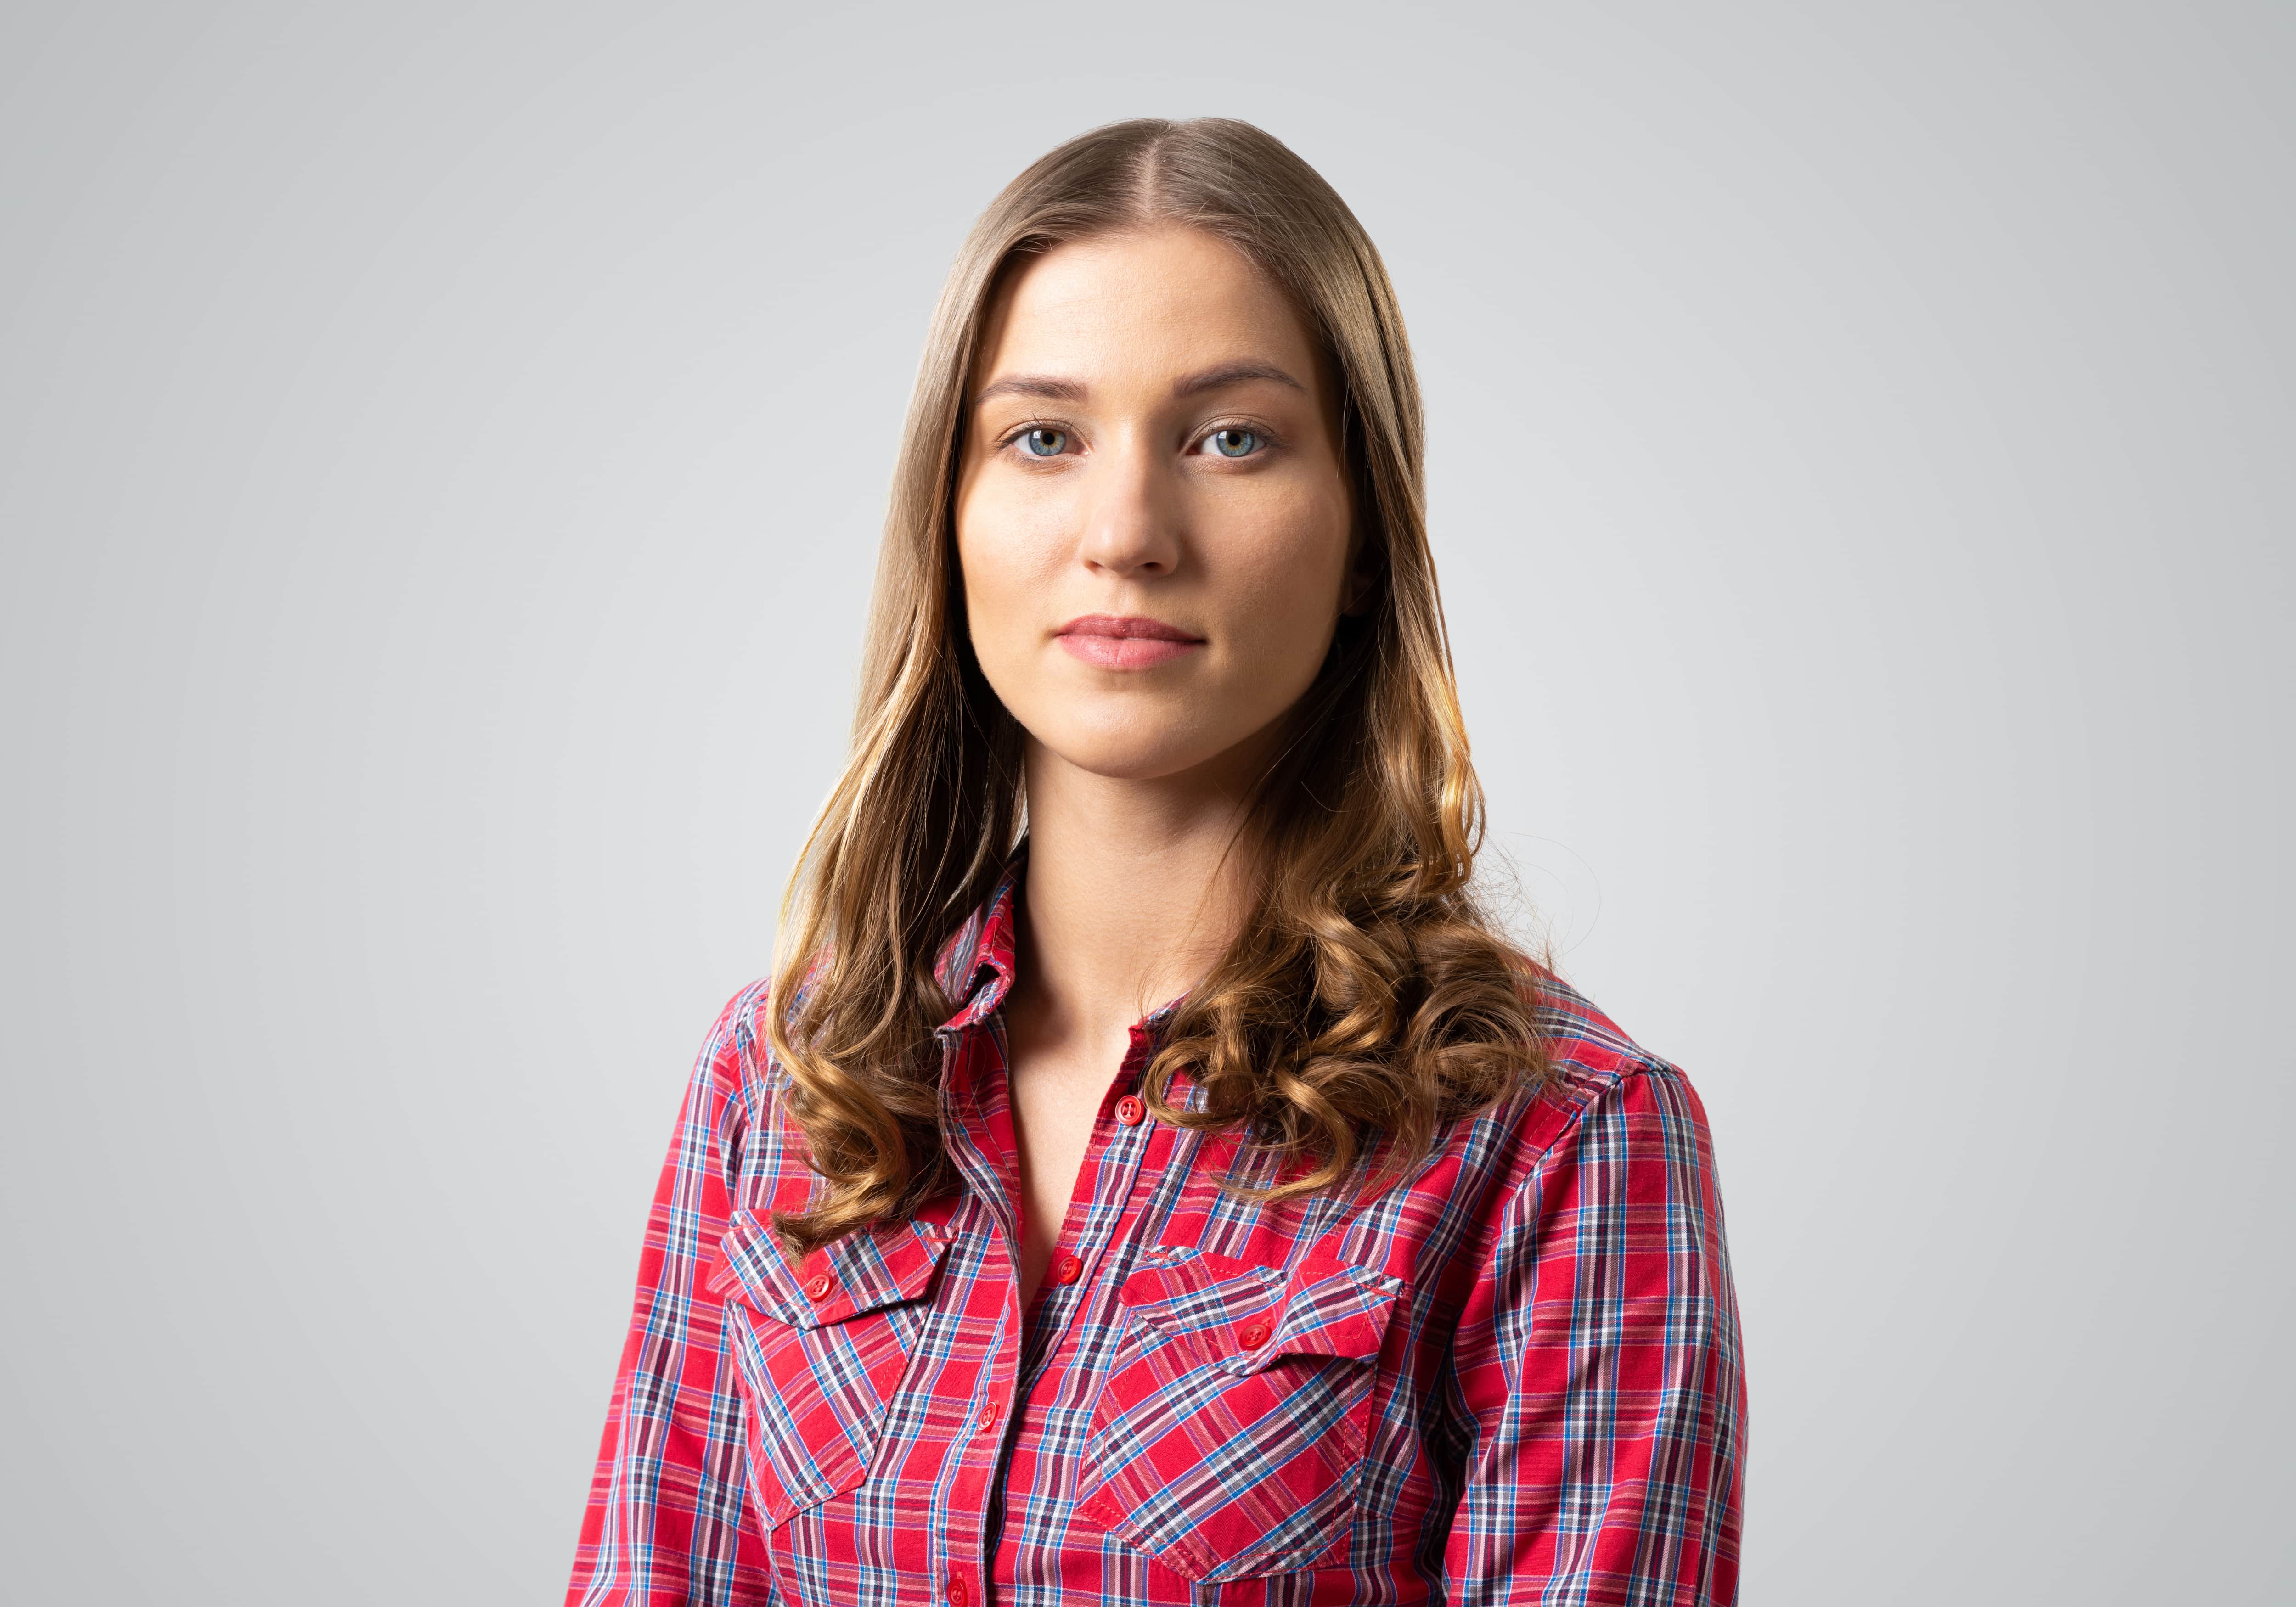 White woman wearing red plaid collared shirt looking straight into the camera with a neutral expression.